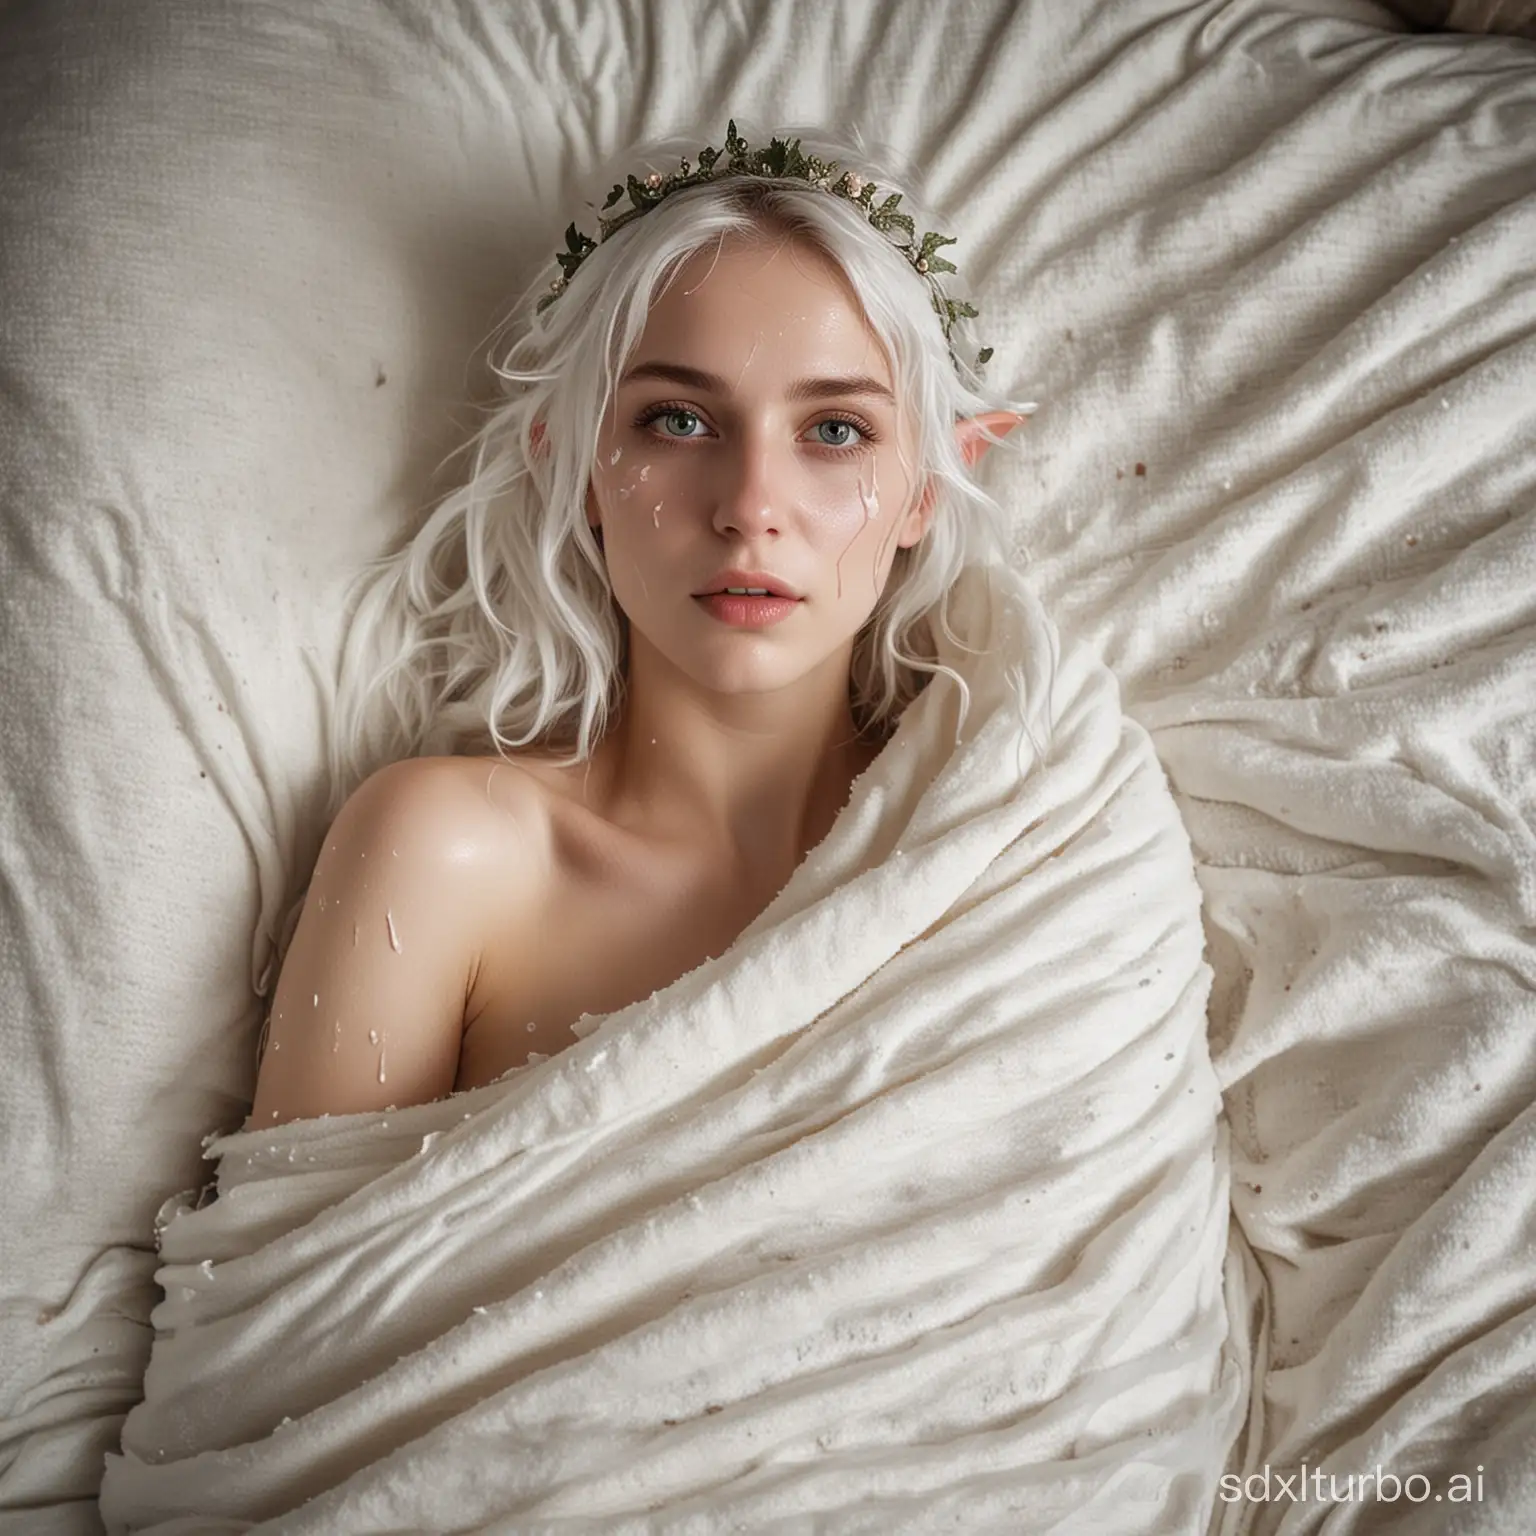 an elf princess wrapped teasingly in a rough blanket, yoghurt stains on her face, sexy